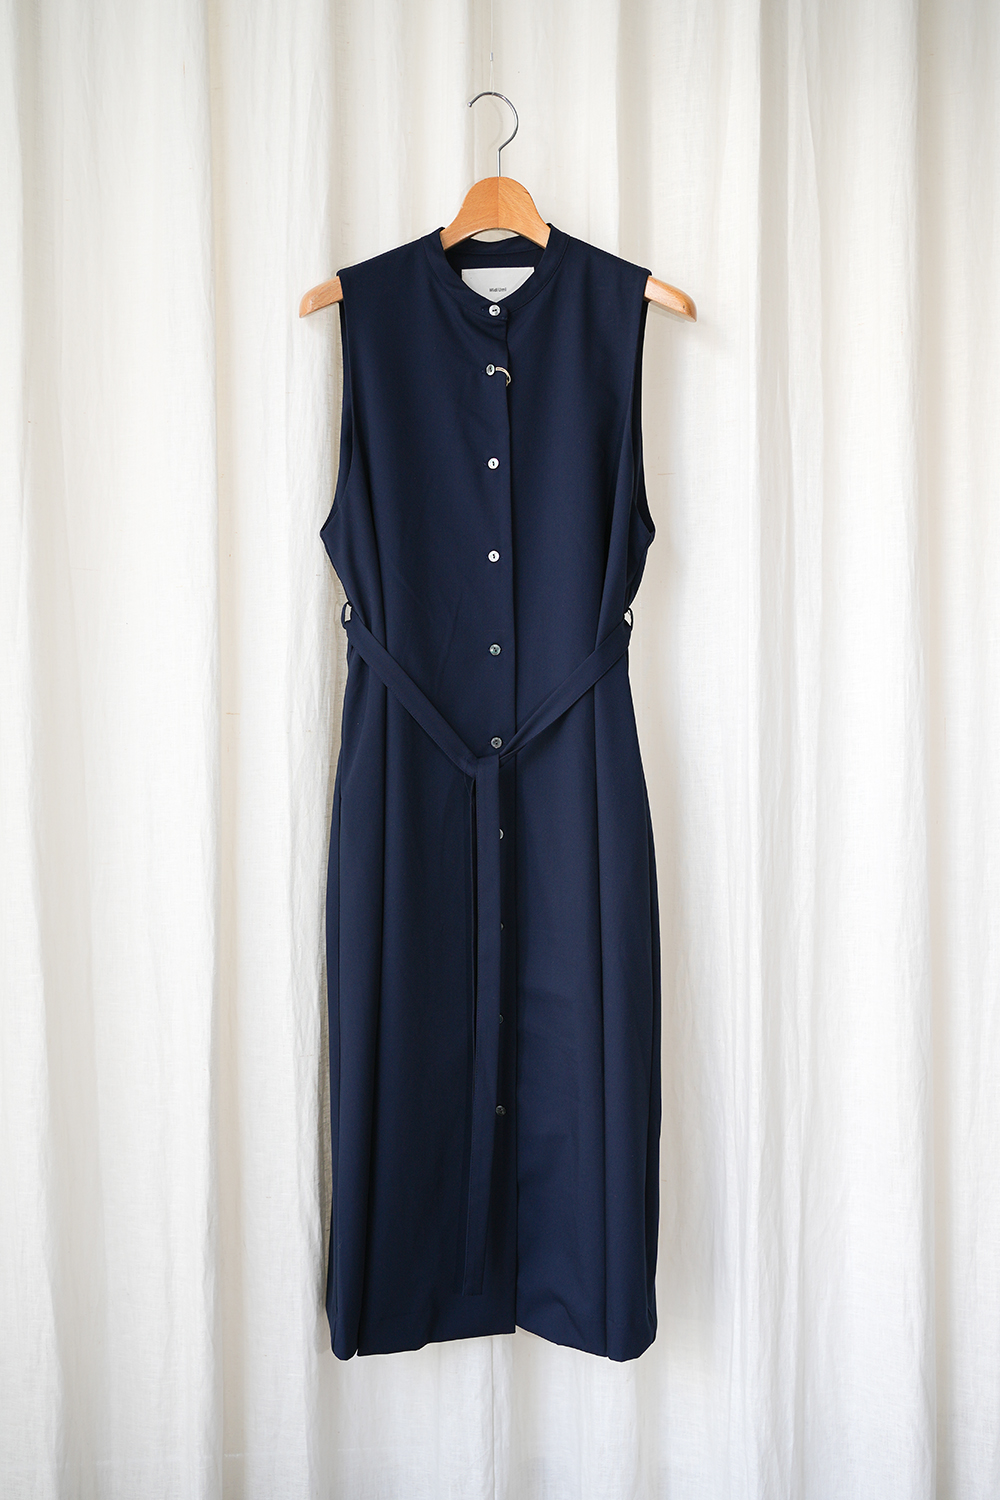 stand collar no sleeve one piece